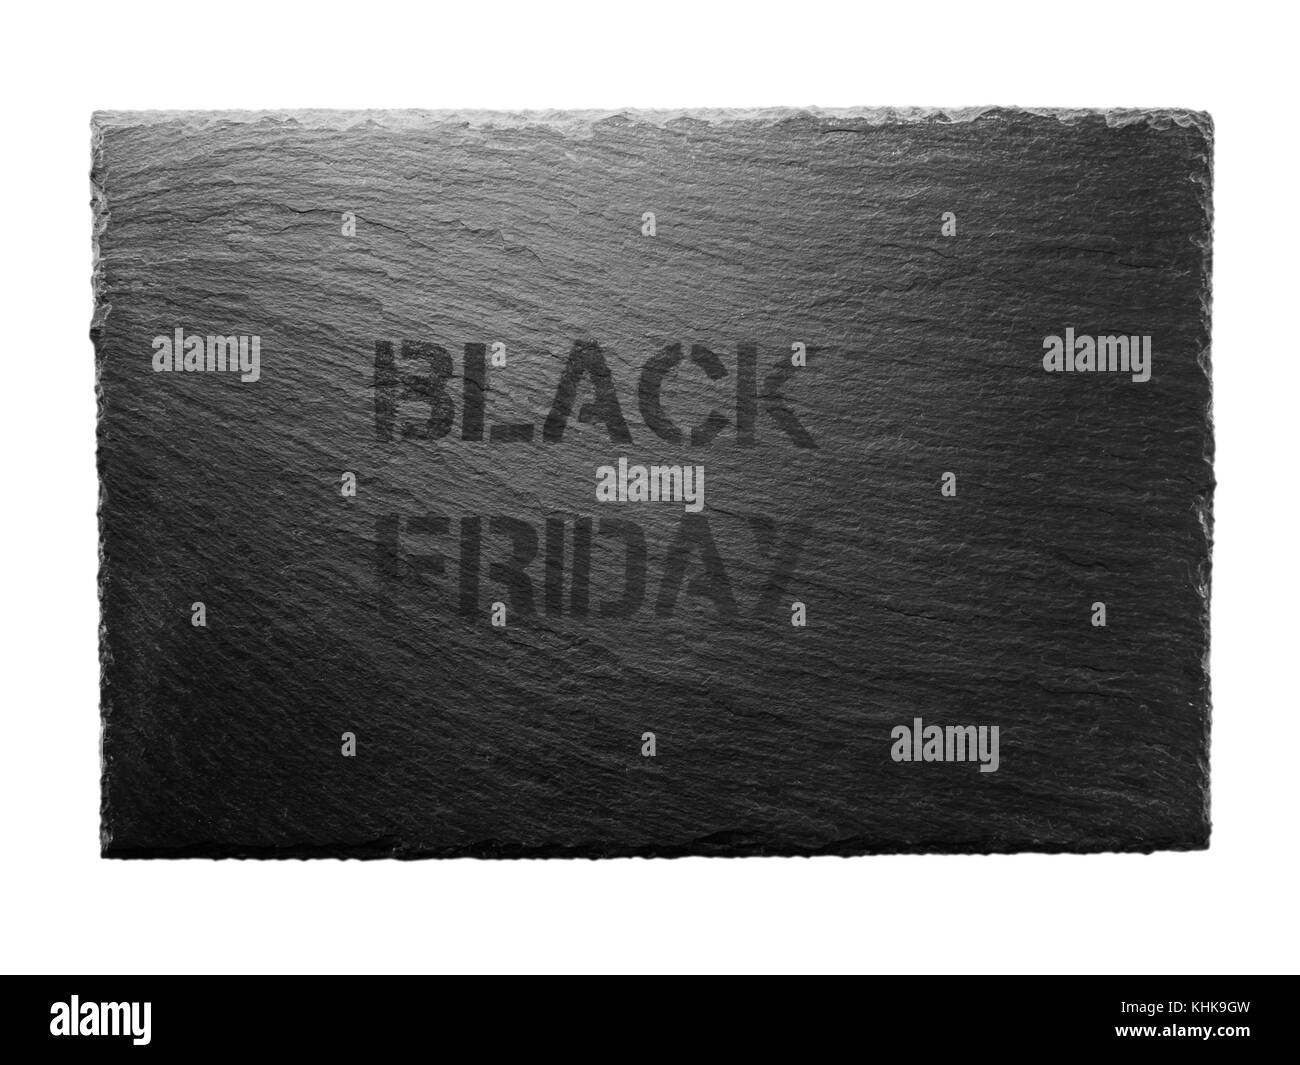 Black friday stencil on the dark gray slate plate isolated on white. Bargain sale concept. Stock Photo